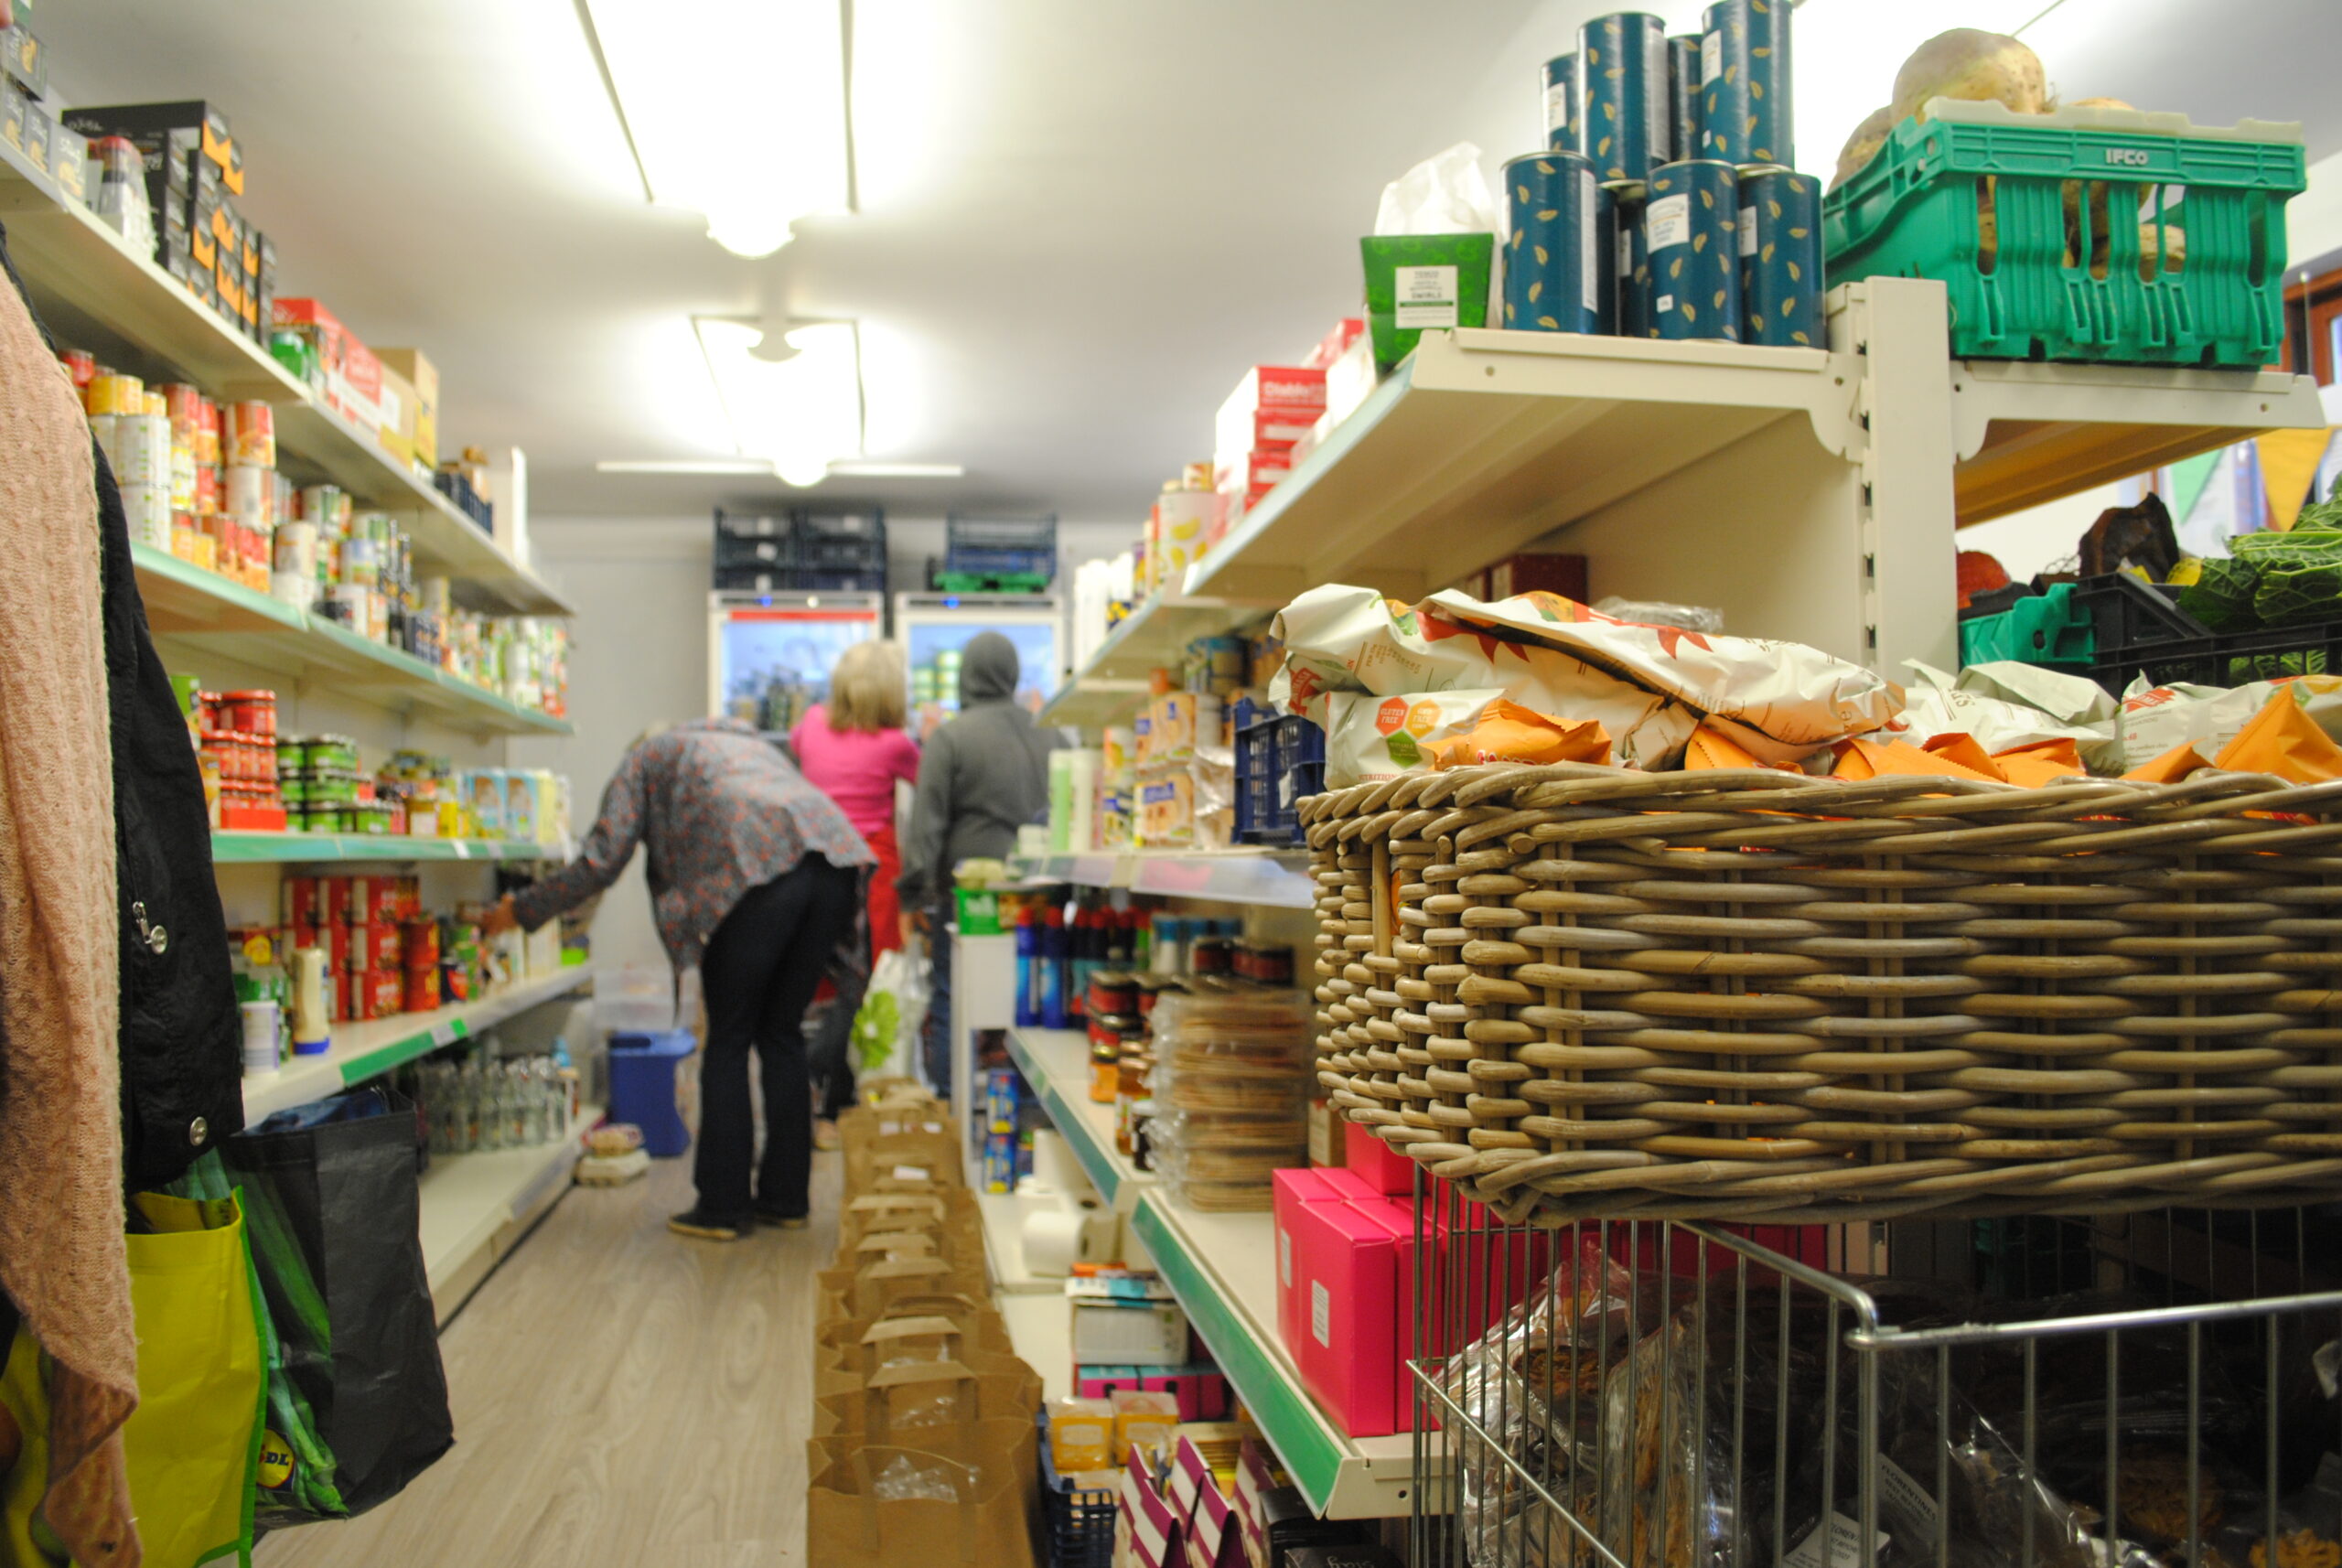 The Vale Pantry premises in Market Place, Sturminster Newton, are too small